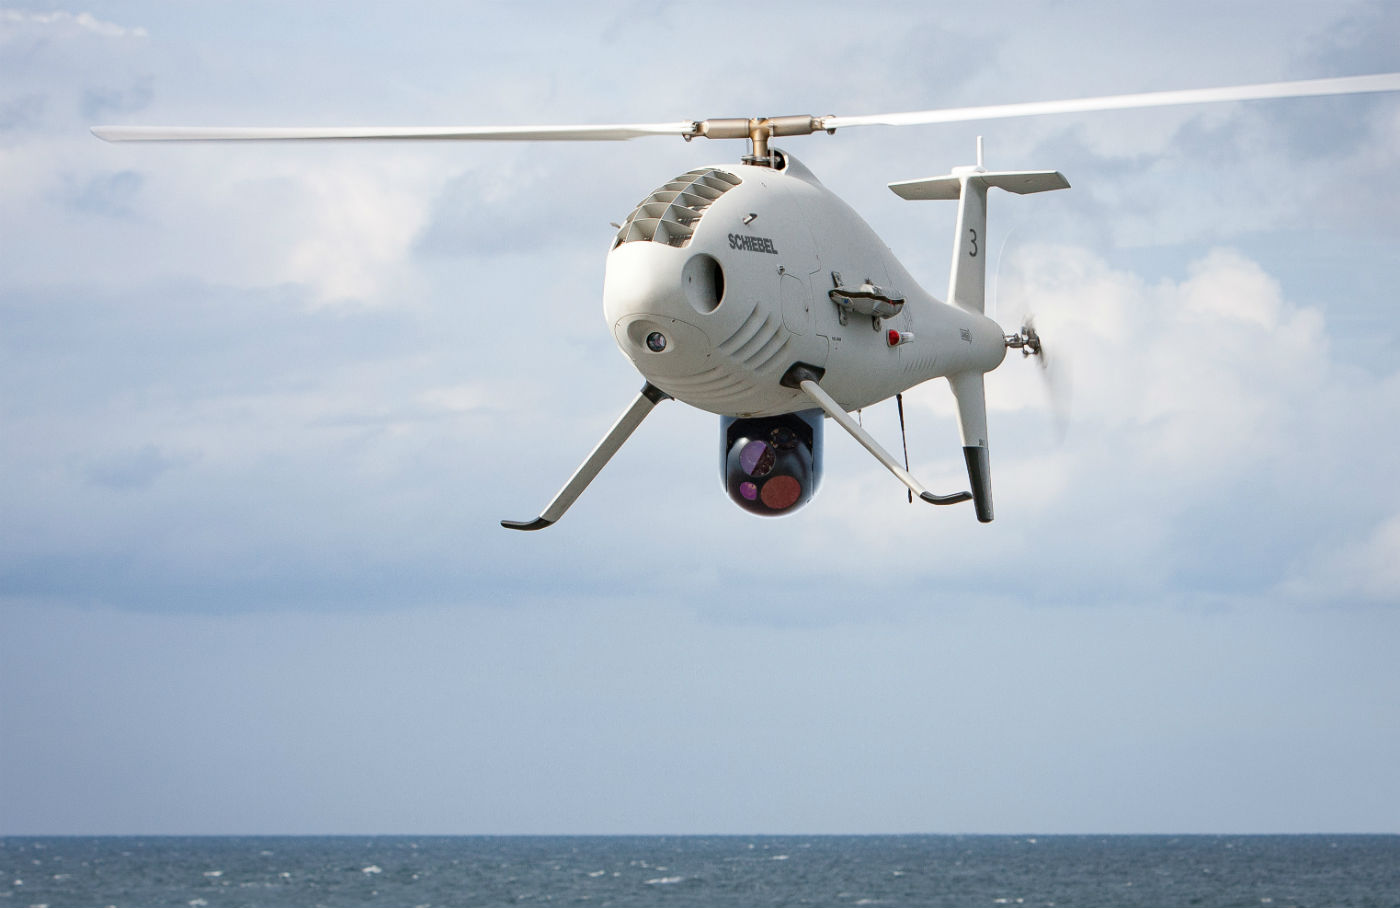 During the flight demonstrations in the Western Mediterranean, the Camcopter S-100 conducted around 30 takeoff and landings within a total of 15 flight hours during day and night. An L3 Wescam’s MX-10 was used to transmit daylight and infrared data. Schiebel Photo